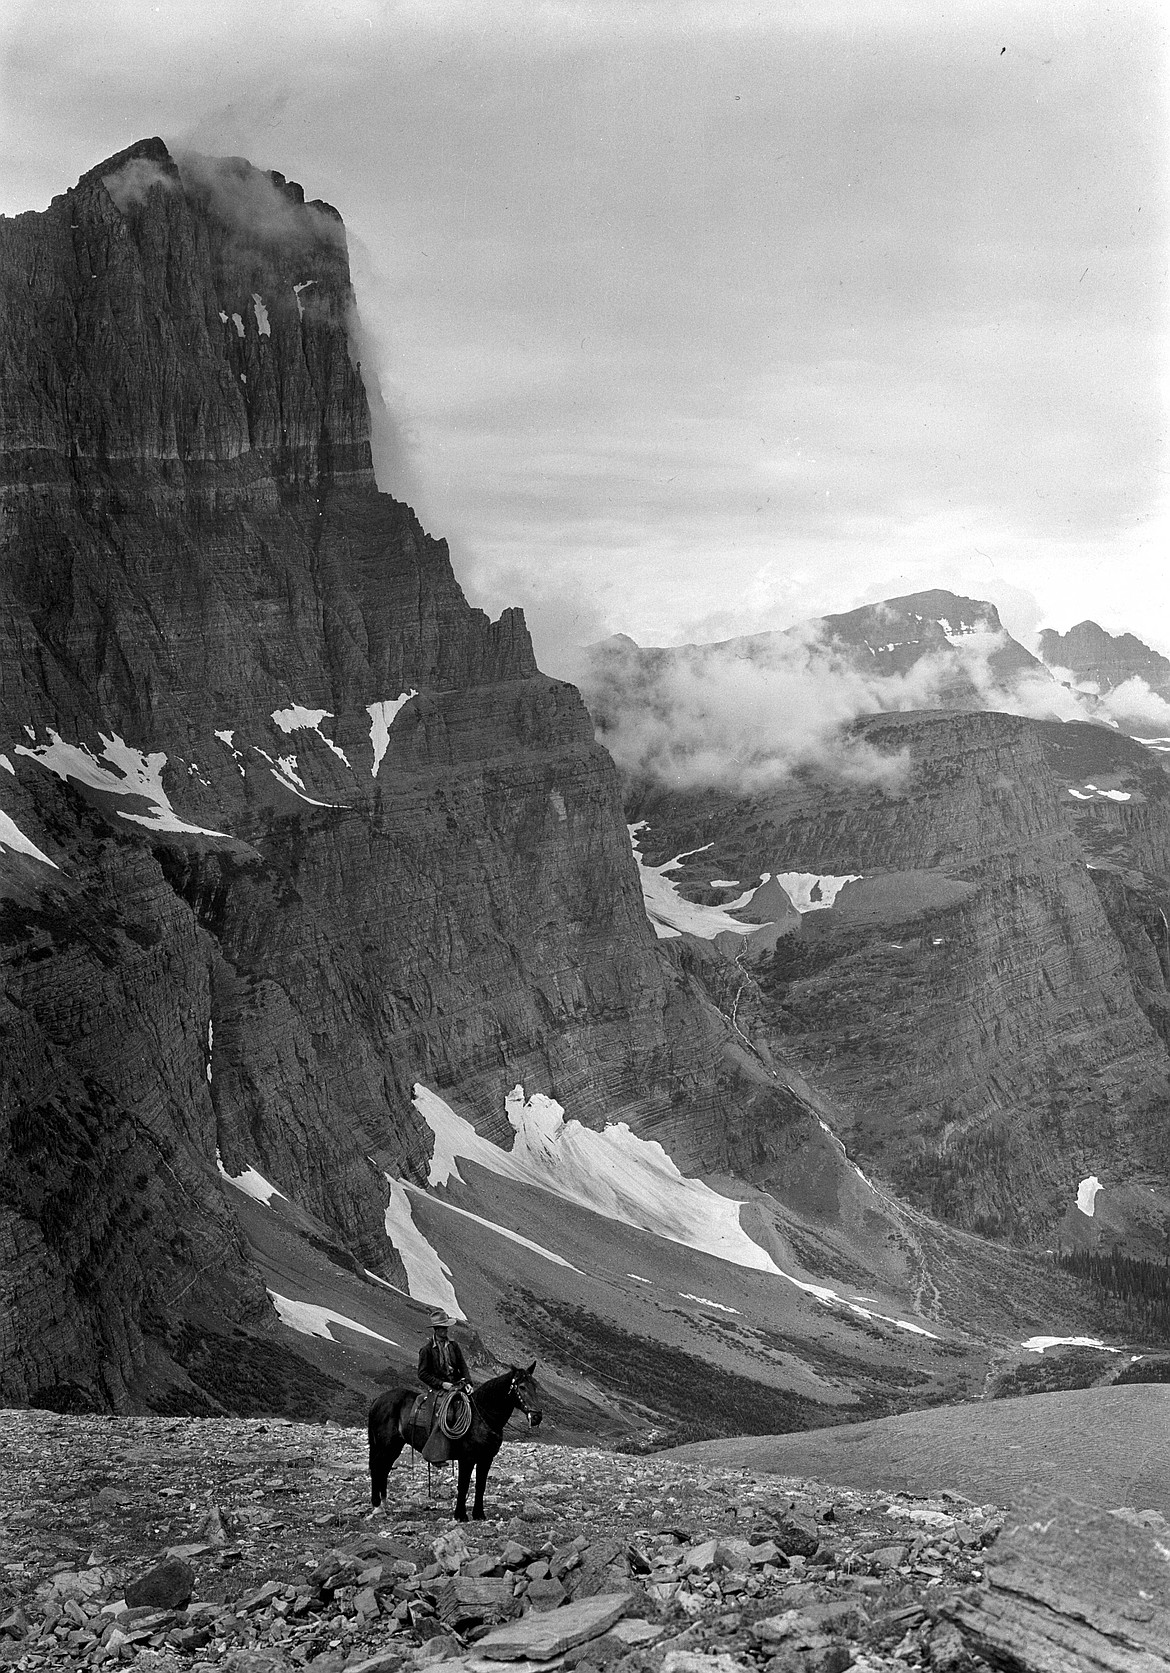 From the chalets, riders would head north over Piegan Pass to the Many Glacier Hotel nearly 13 miles away. This c. 1932 T.J. Hileman photograph shows a lone rider at the pass with Mount Gould on the left. (NPS GLAC103003)